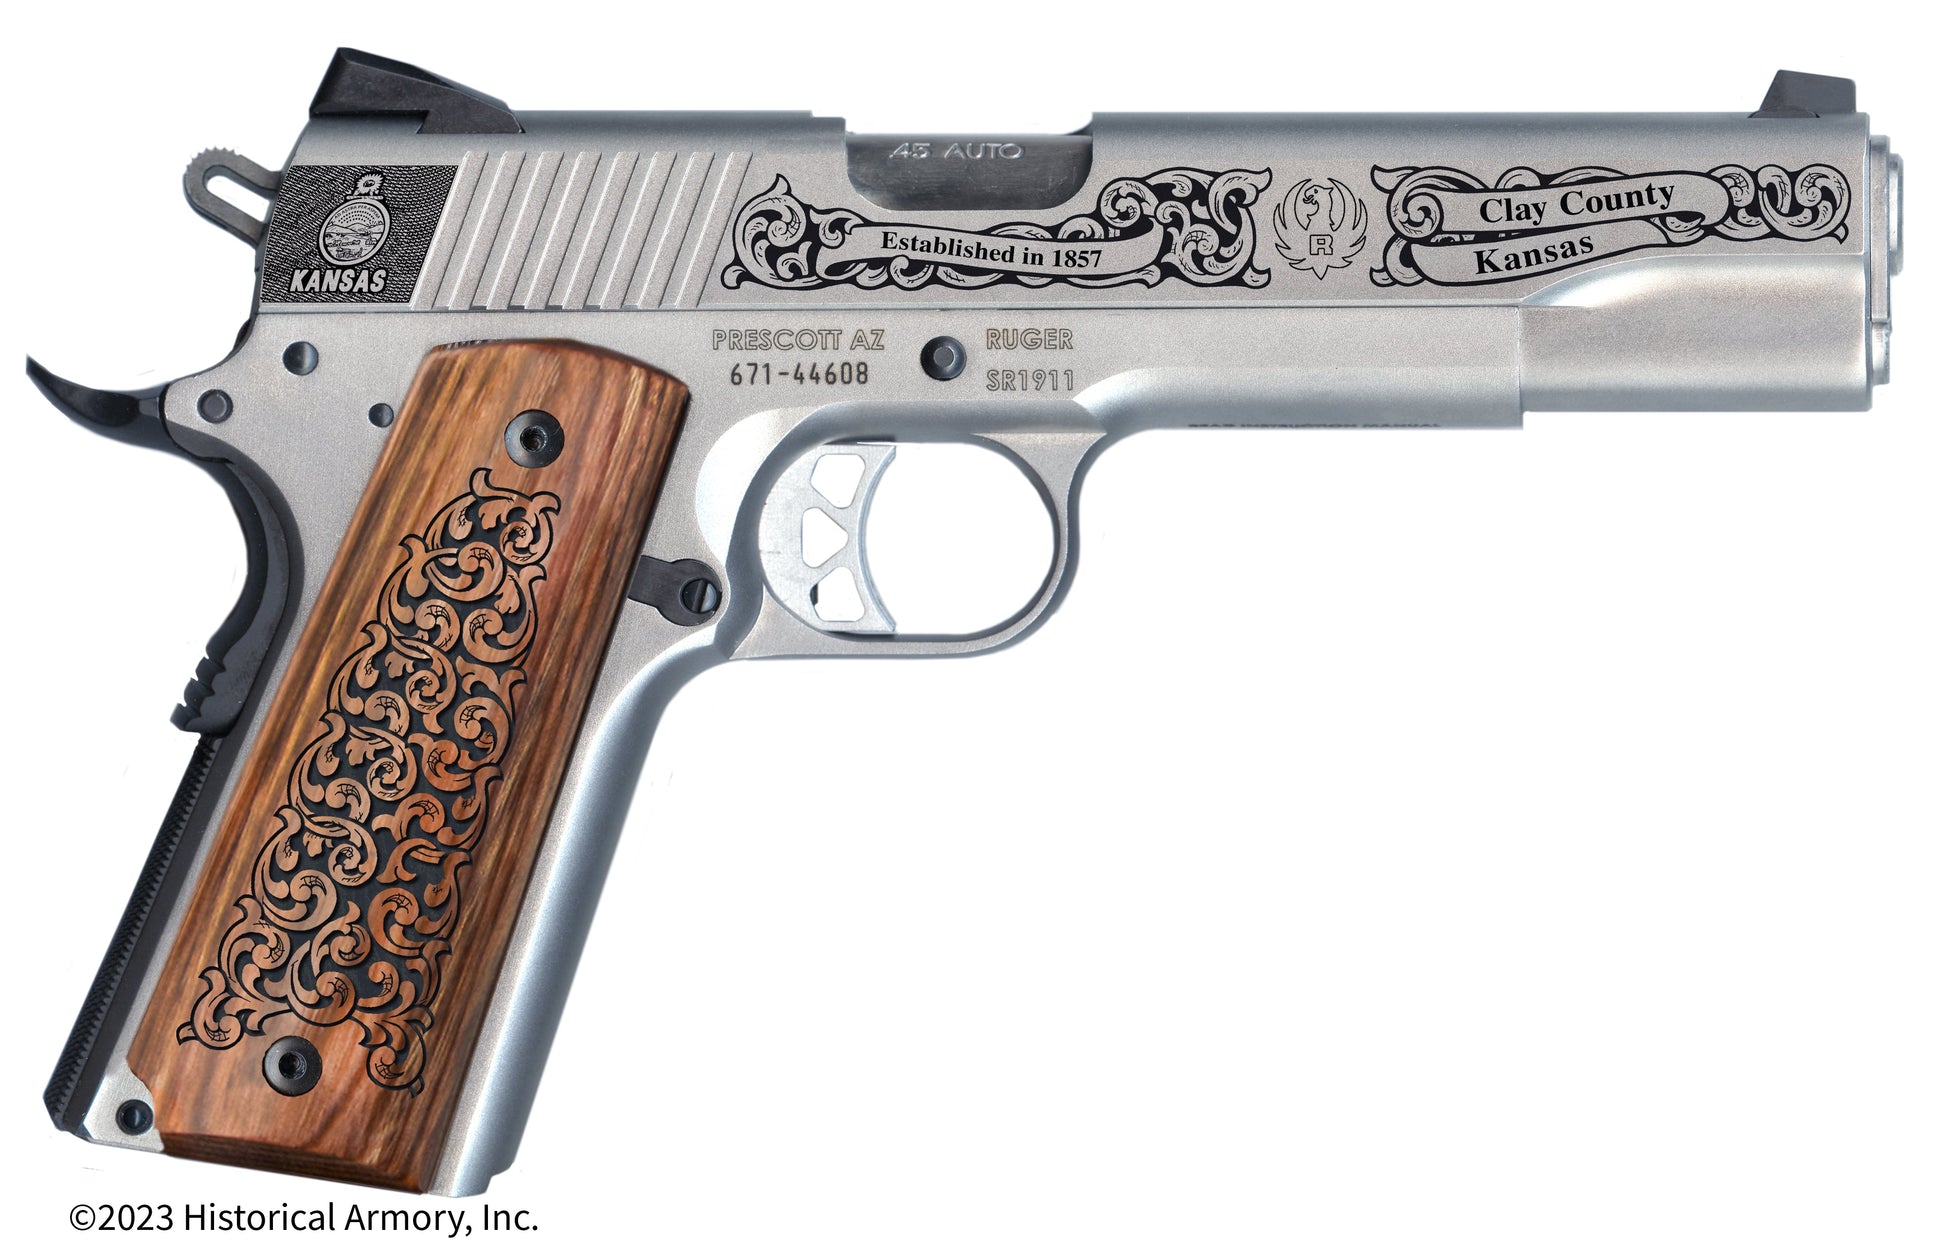 Clay County Kansas Engraved .45 Auto Ruger 1911